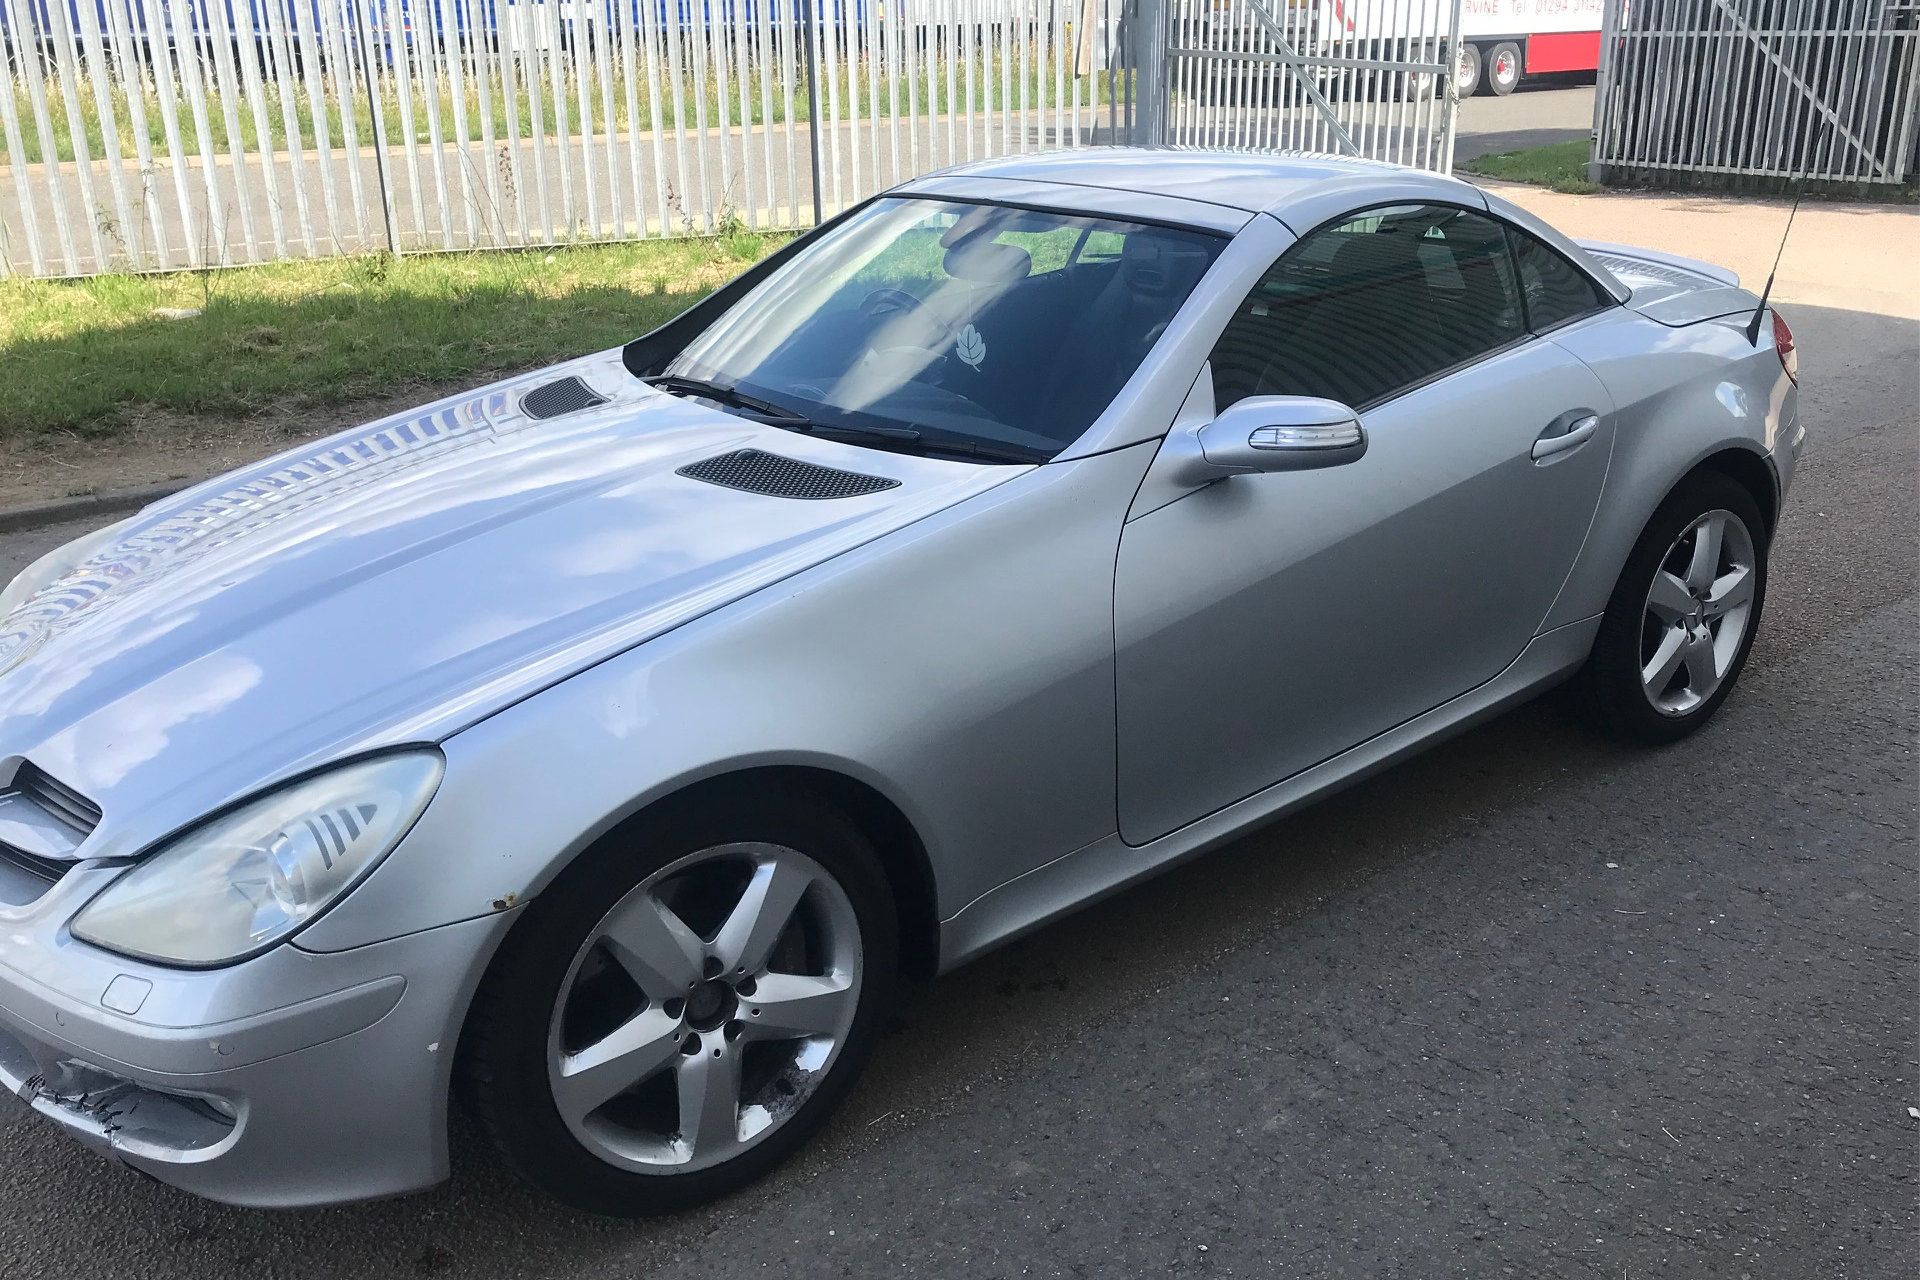 2005 Mercedes SLK 350 2 Dr Convertible - CL505 - NO VAT ON THE HAMMER - Location: Corby, N - Image 3 of 18